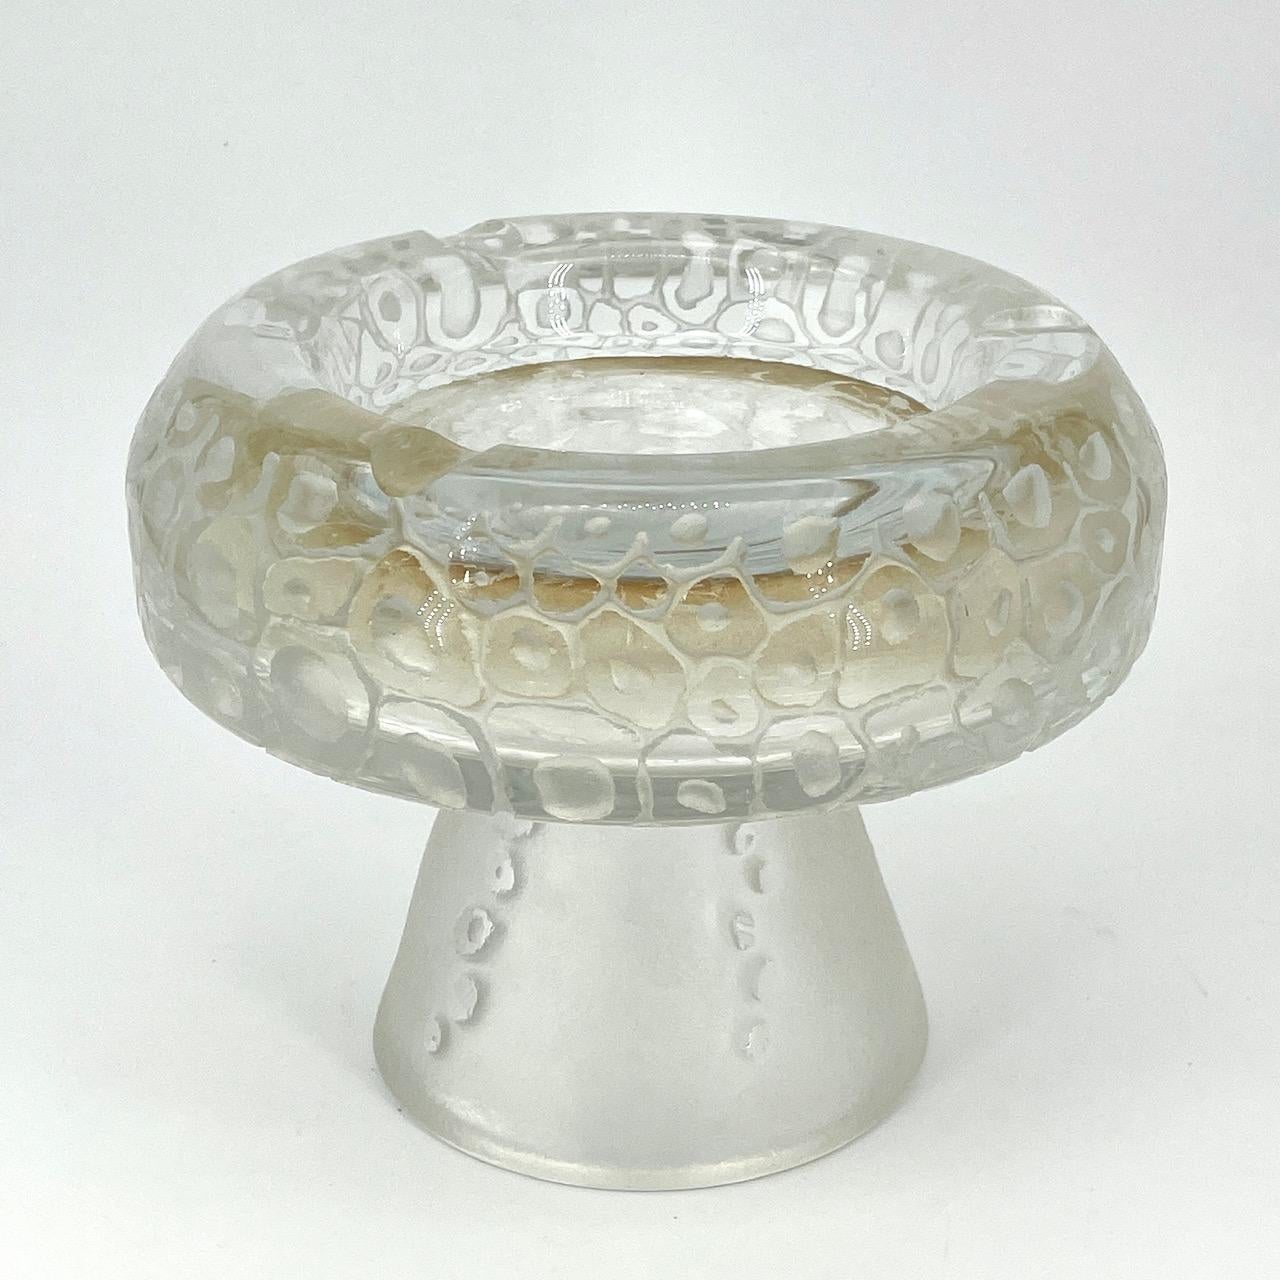 1960s Dolomite Mushroom Art Glass Footed Ashtray Vintage Italian Mid-Century Era In Good Condition For Sale In Hyattsville, MD